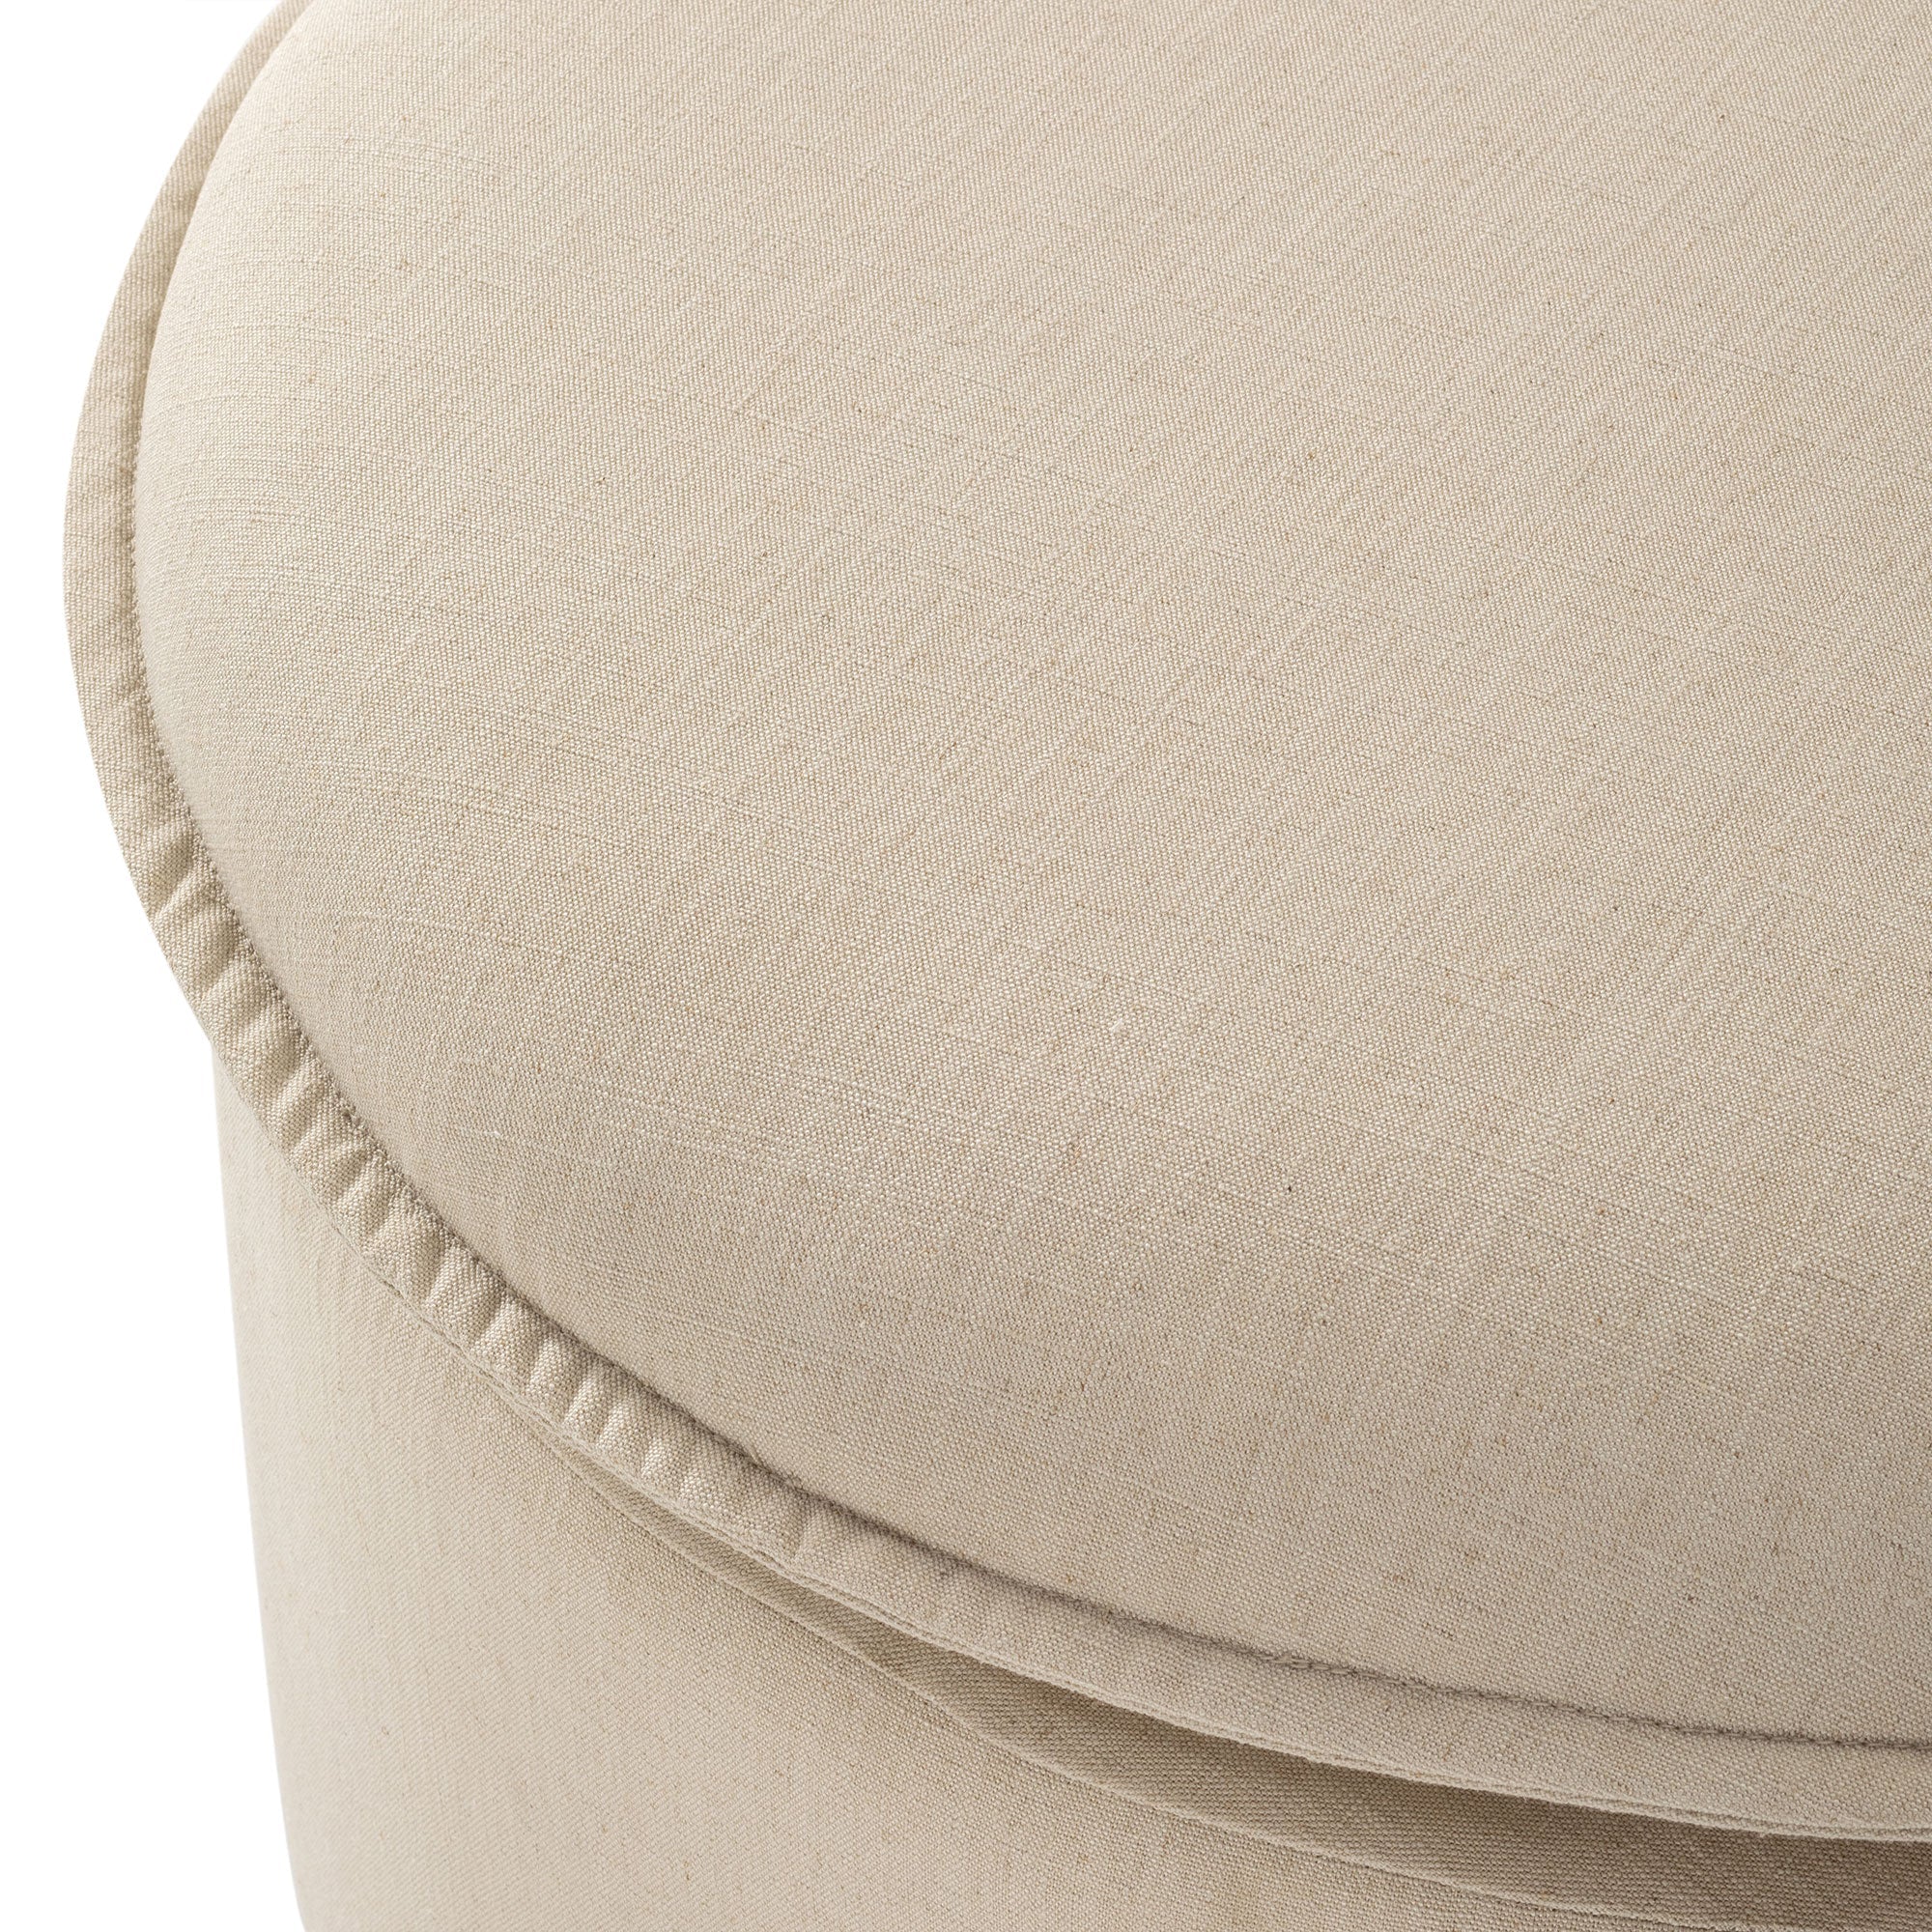 Lyra Organic Ottoman in Taupe Fabric Upholstery in Ottomans & Benches by Maven Lane